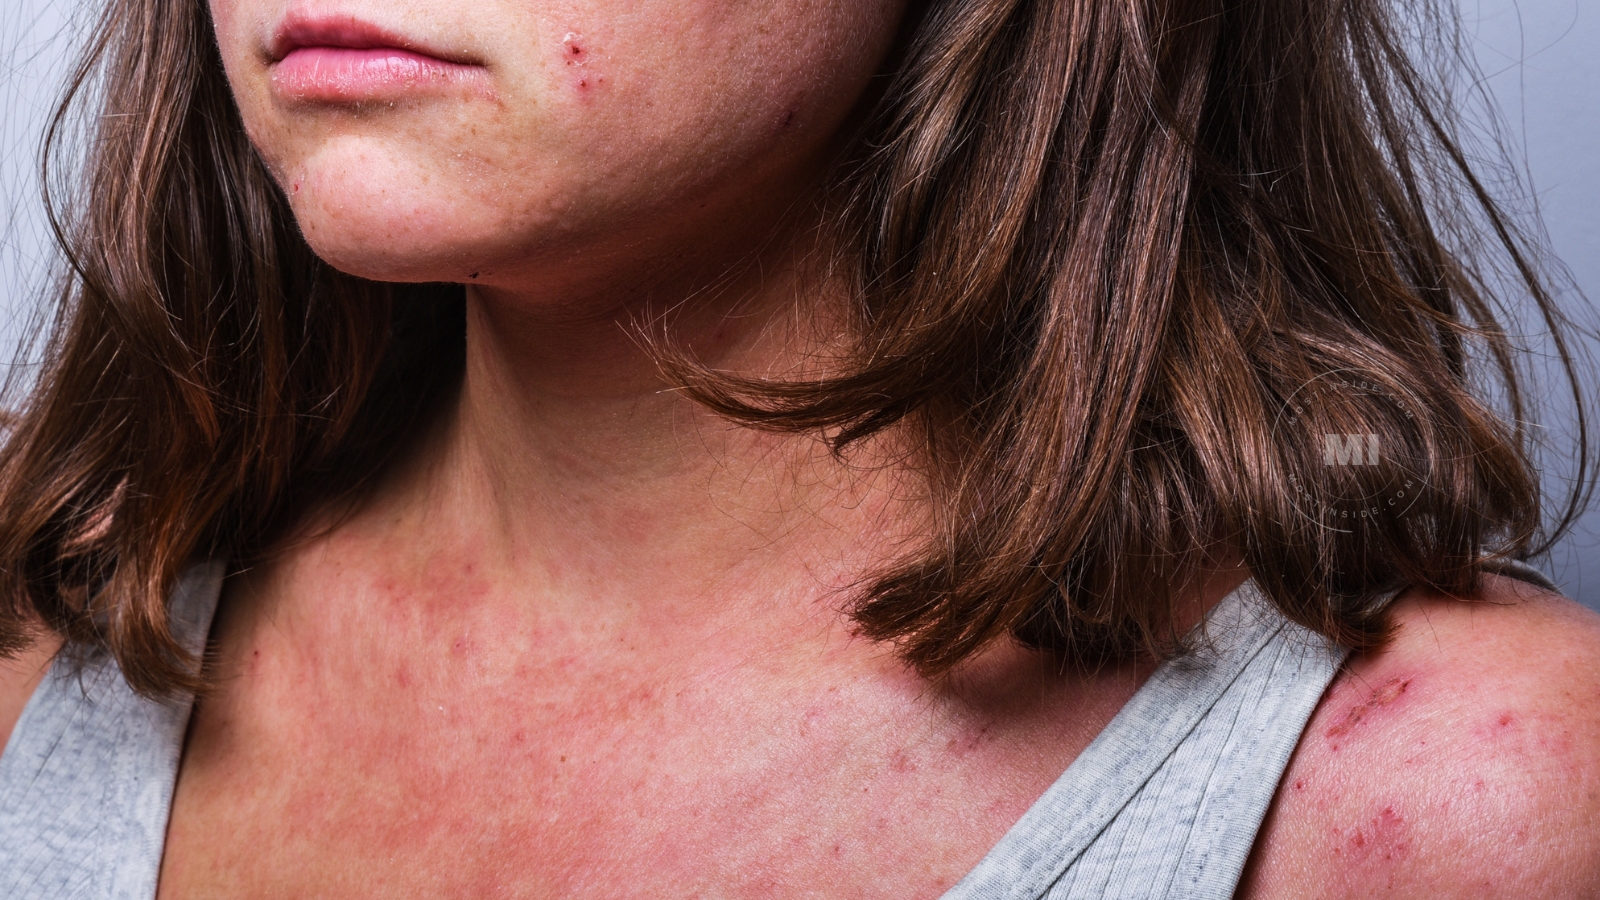 Skin Discoloration When To See A Doctor